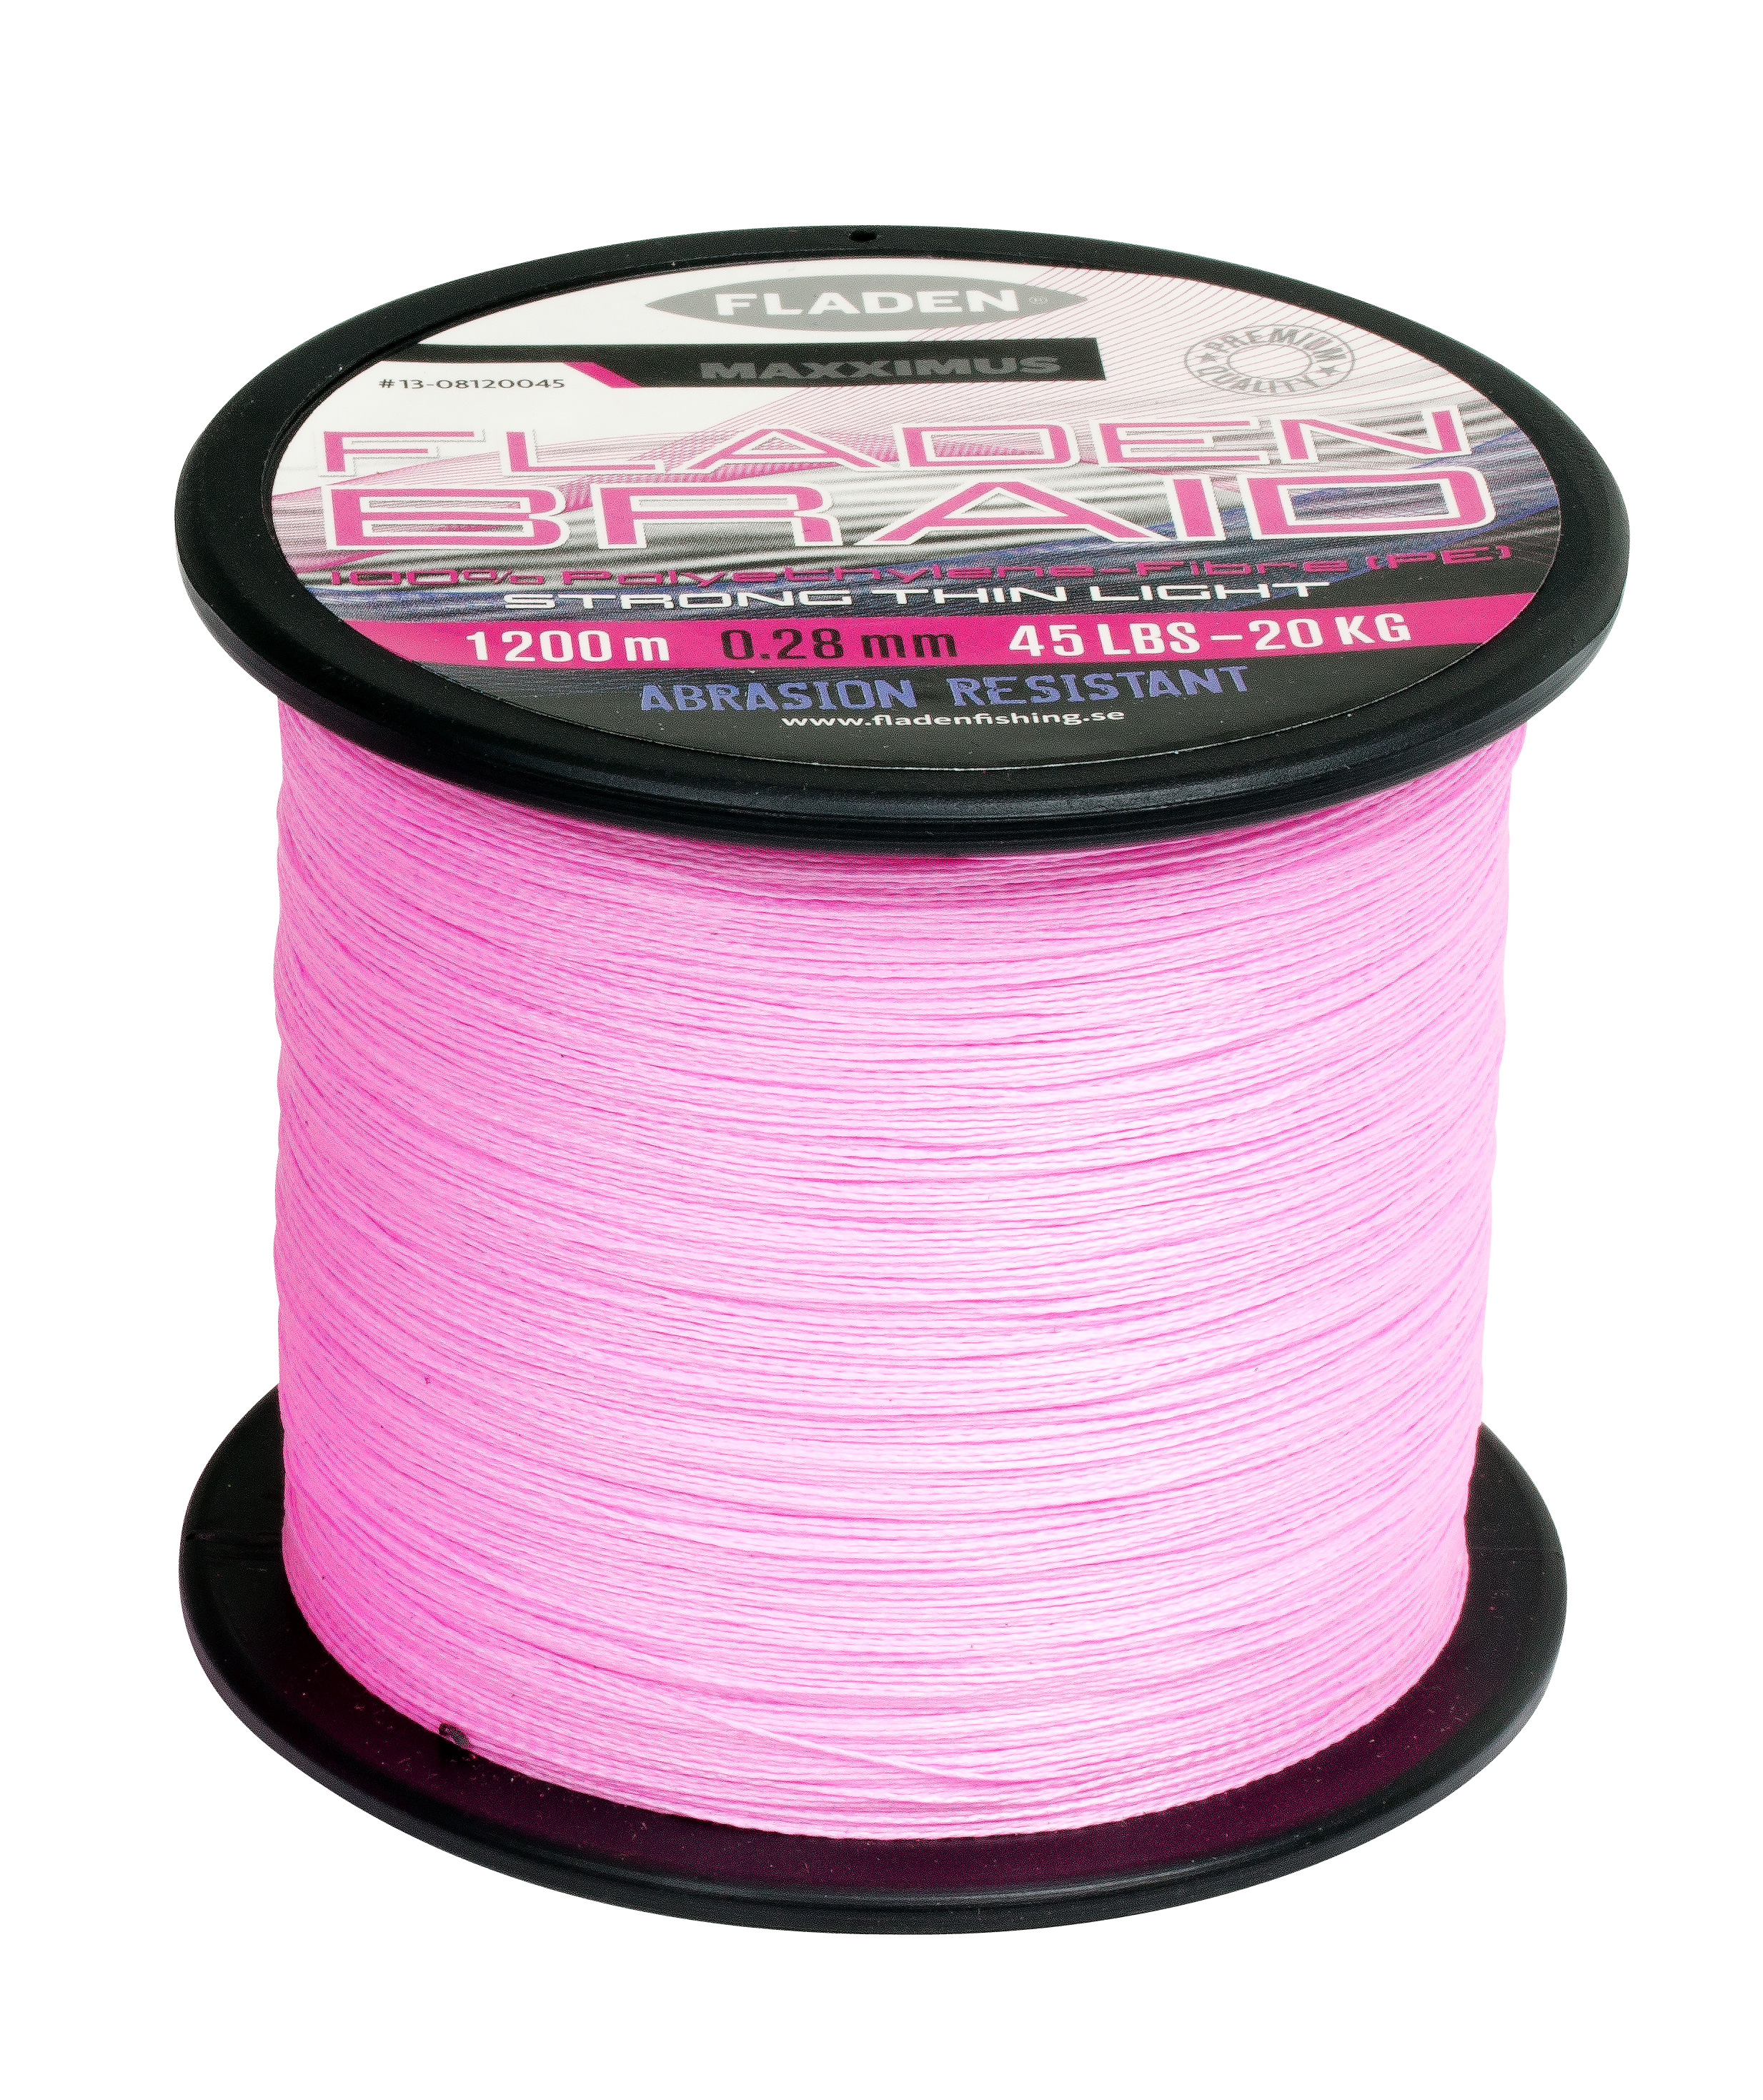 FLADEN 150m FISHING BRAID 25lb RED 0.16 Teflon Coated Braided line for Reel 